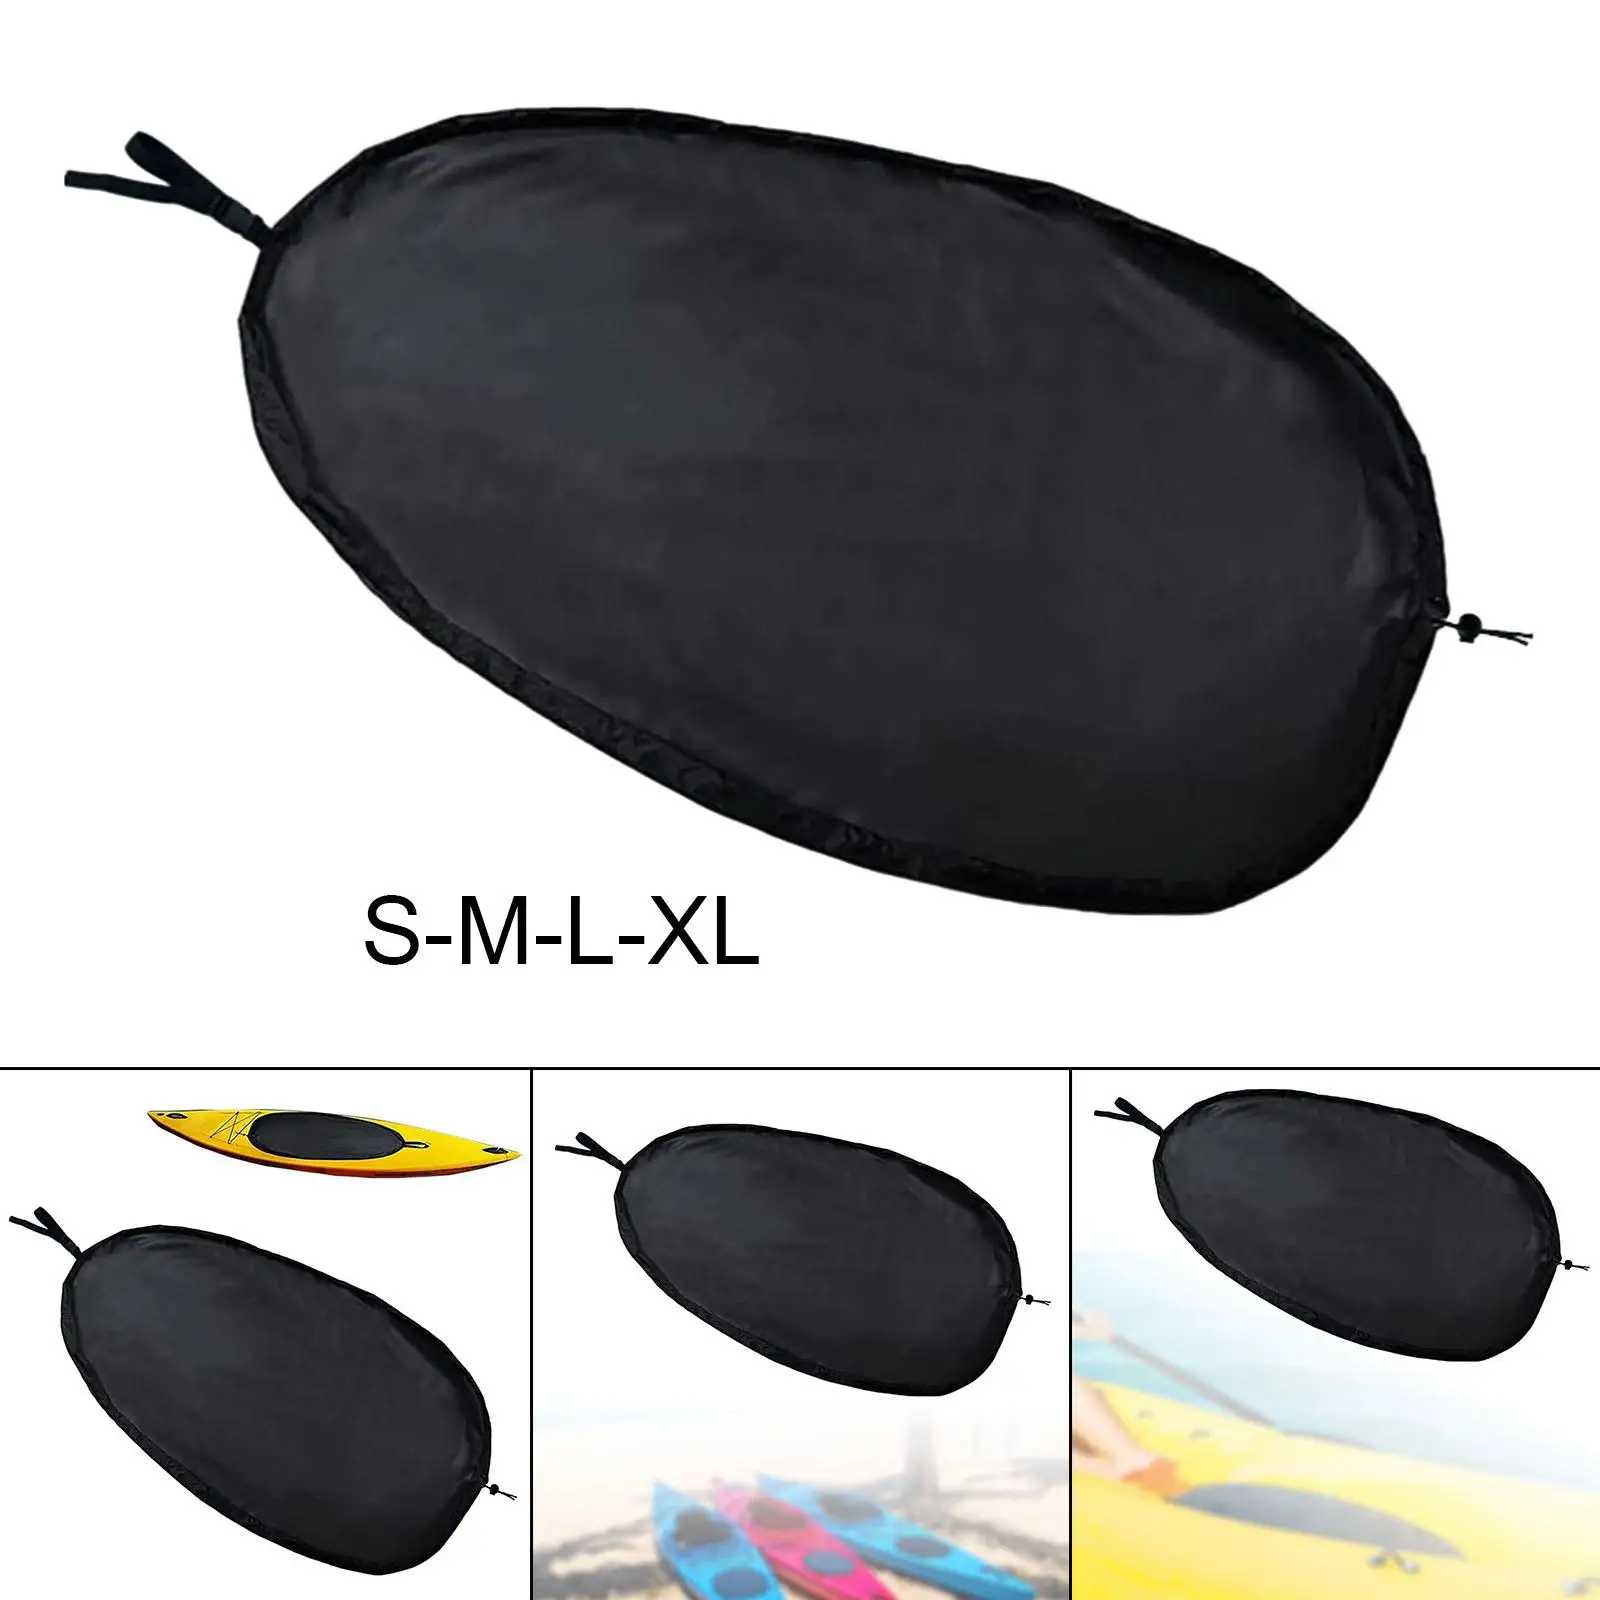 Kayak Cockpit Cover Breathable Dust Proof Cover Kayak Seat Cover for Fishing